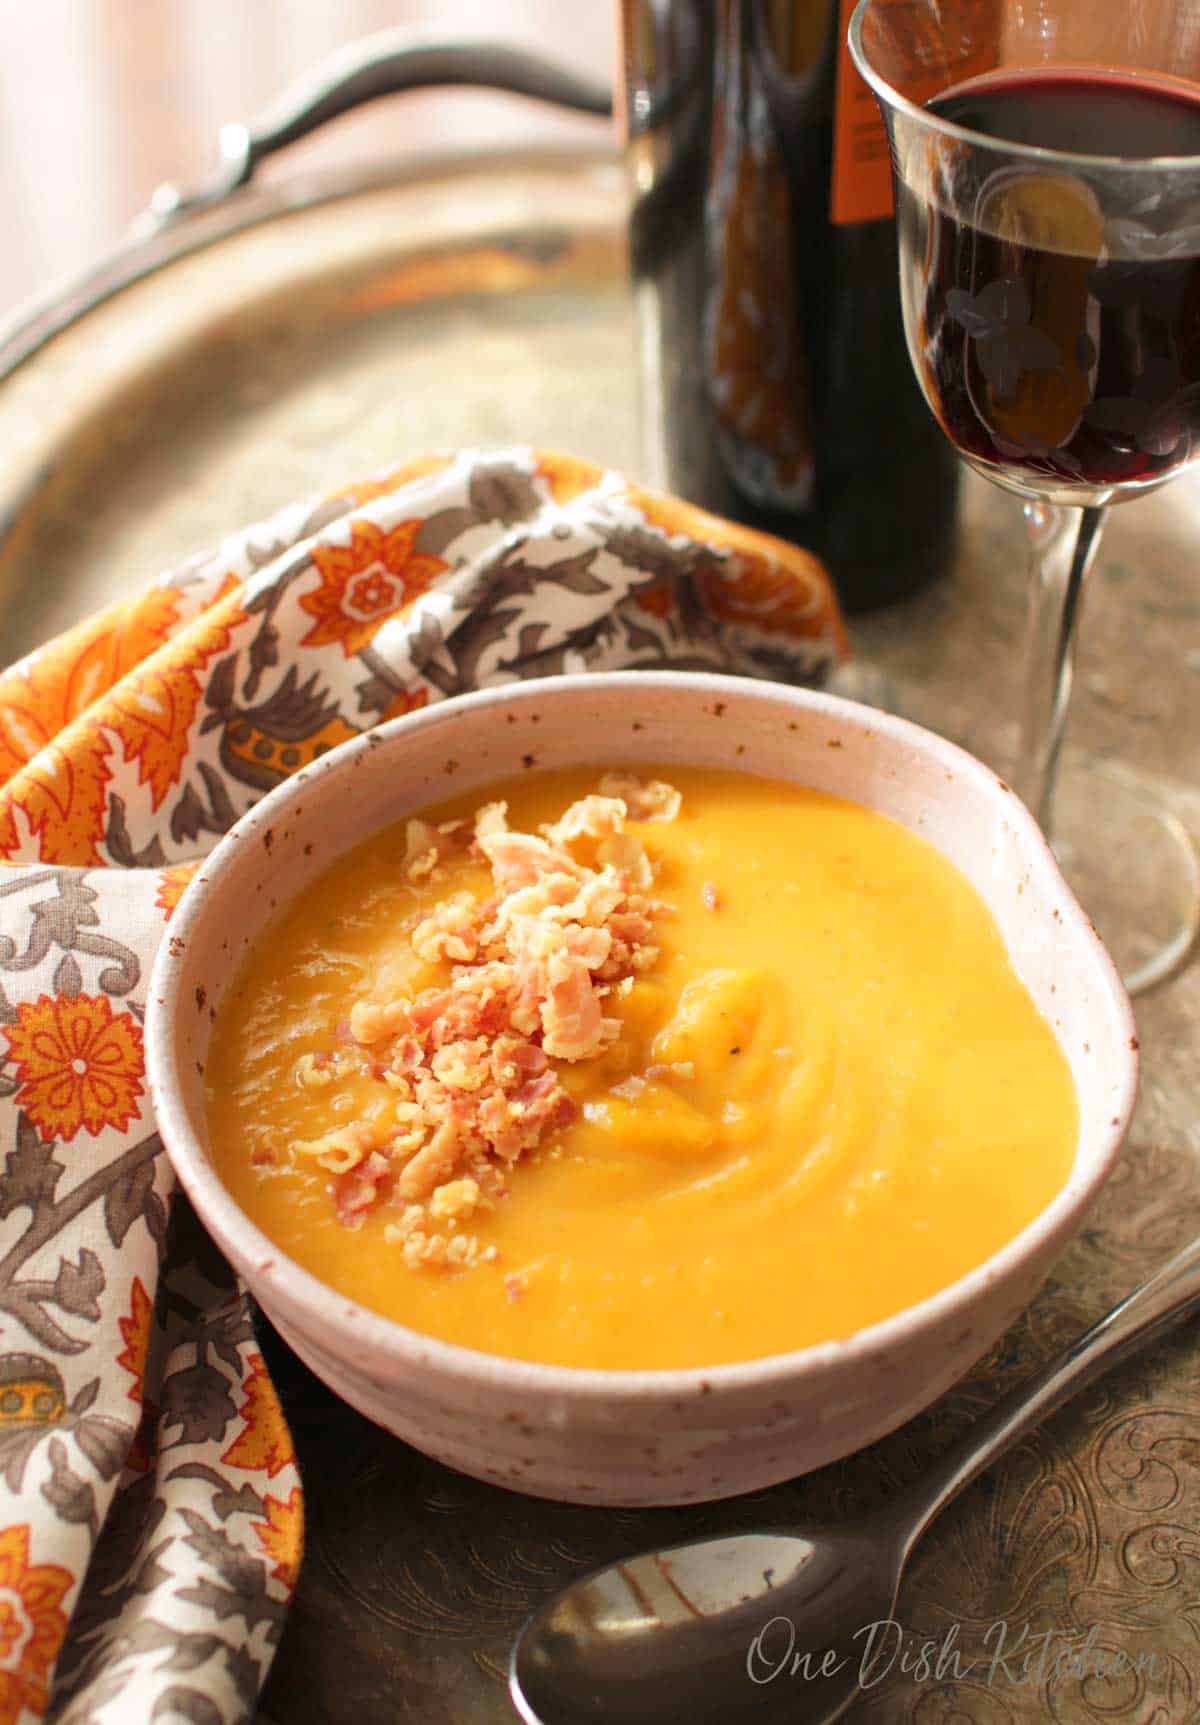 A bowl of butternut squash soup topped with homemade croutons next to a glass and bottle of red wine and a orange and grey cloth napkin all on a metal tray.